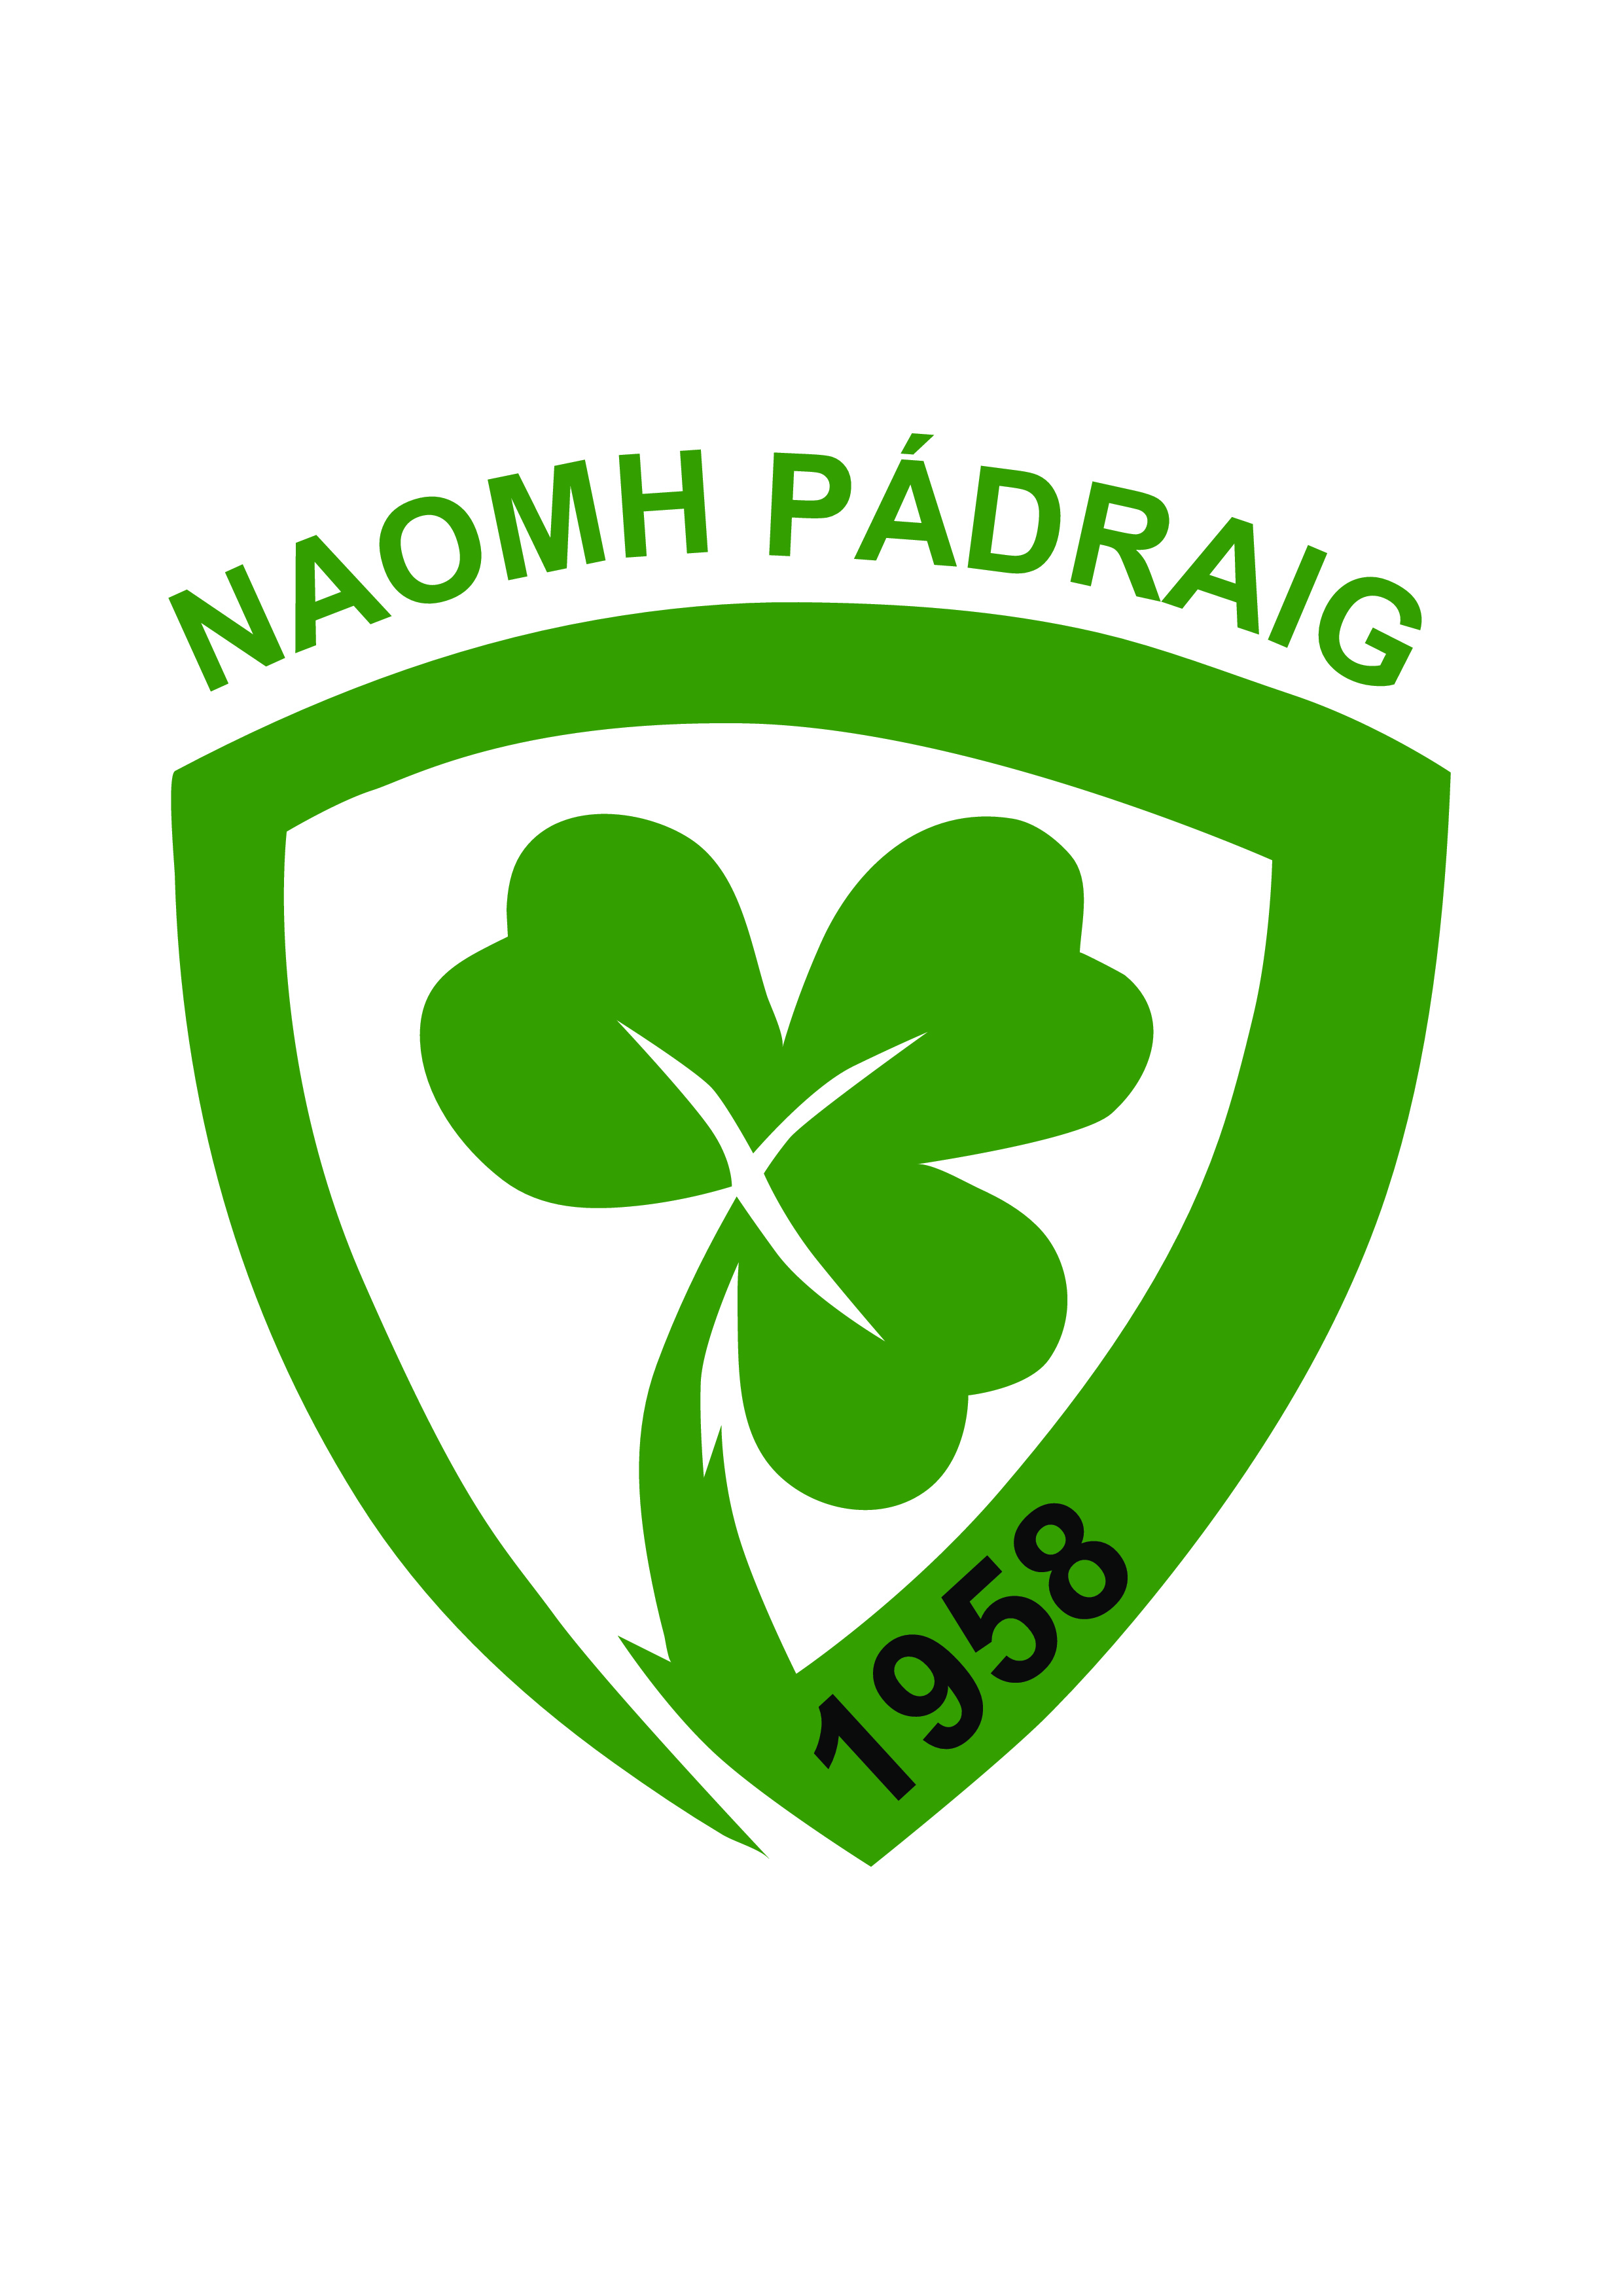 St Patrick's Club Notes December 20th